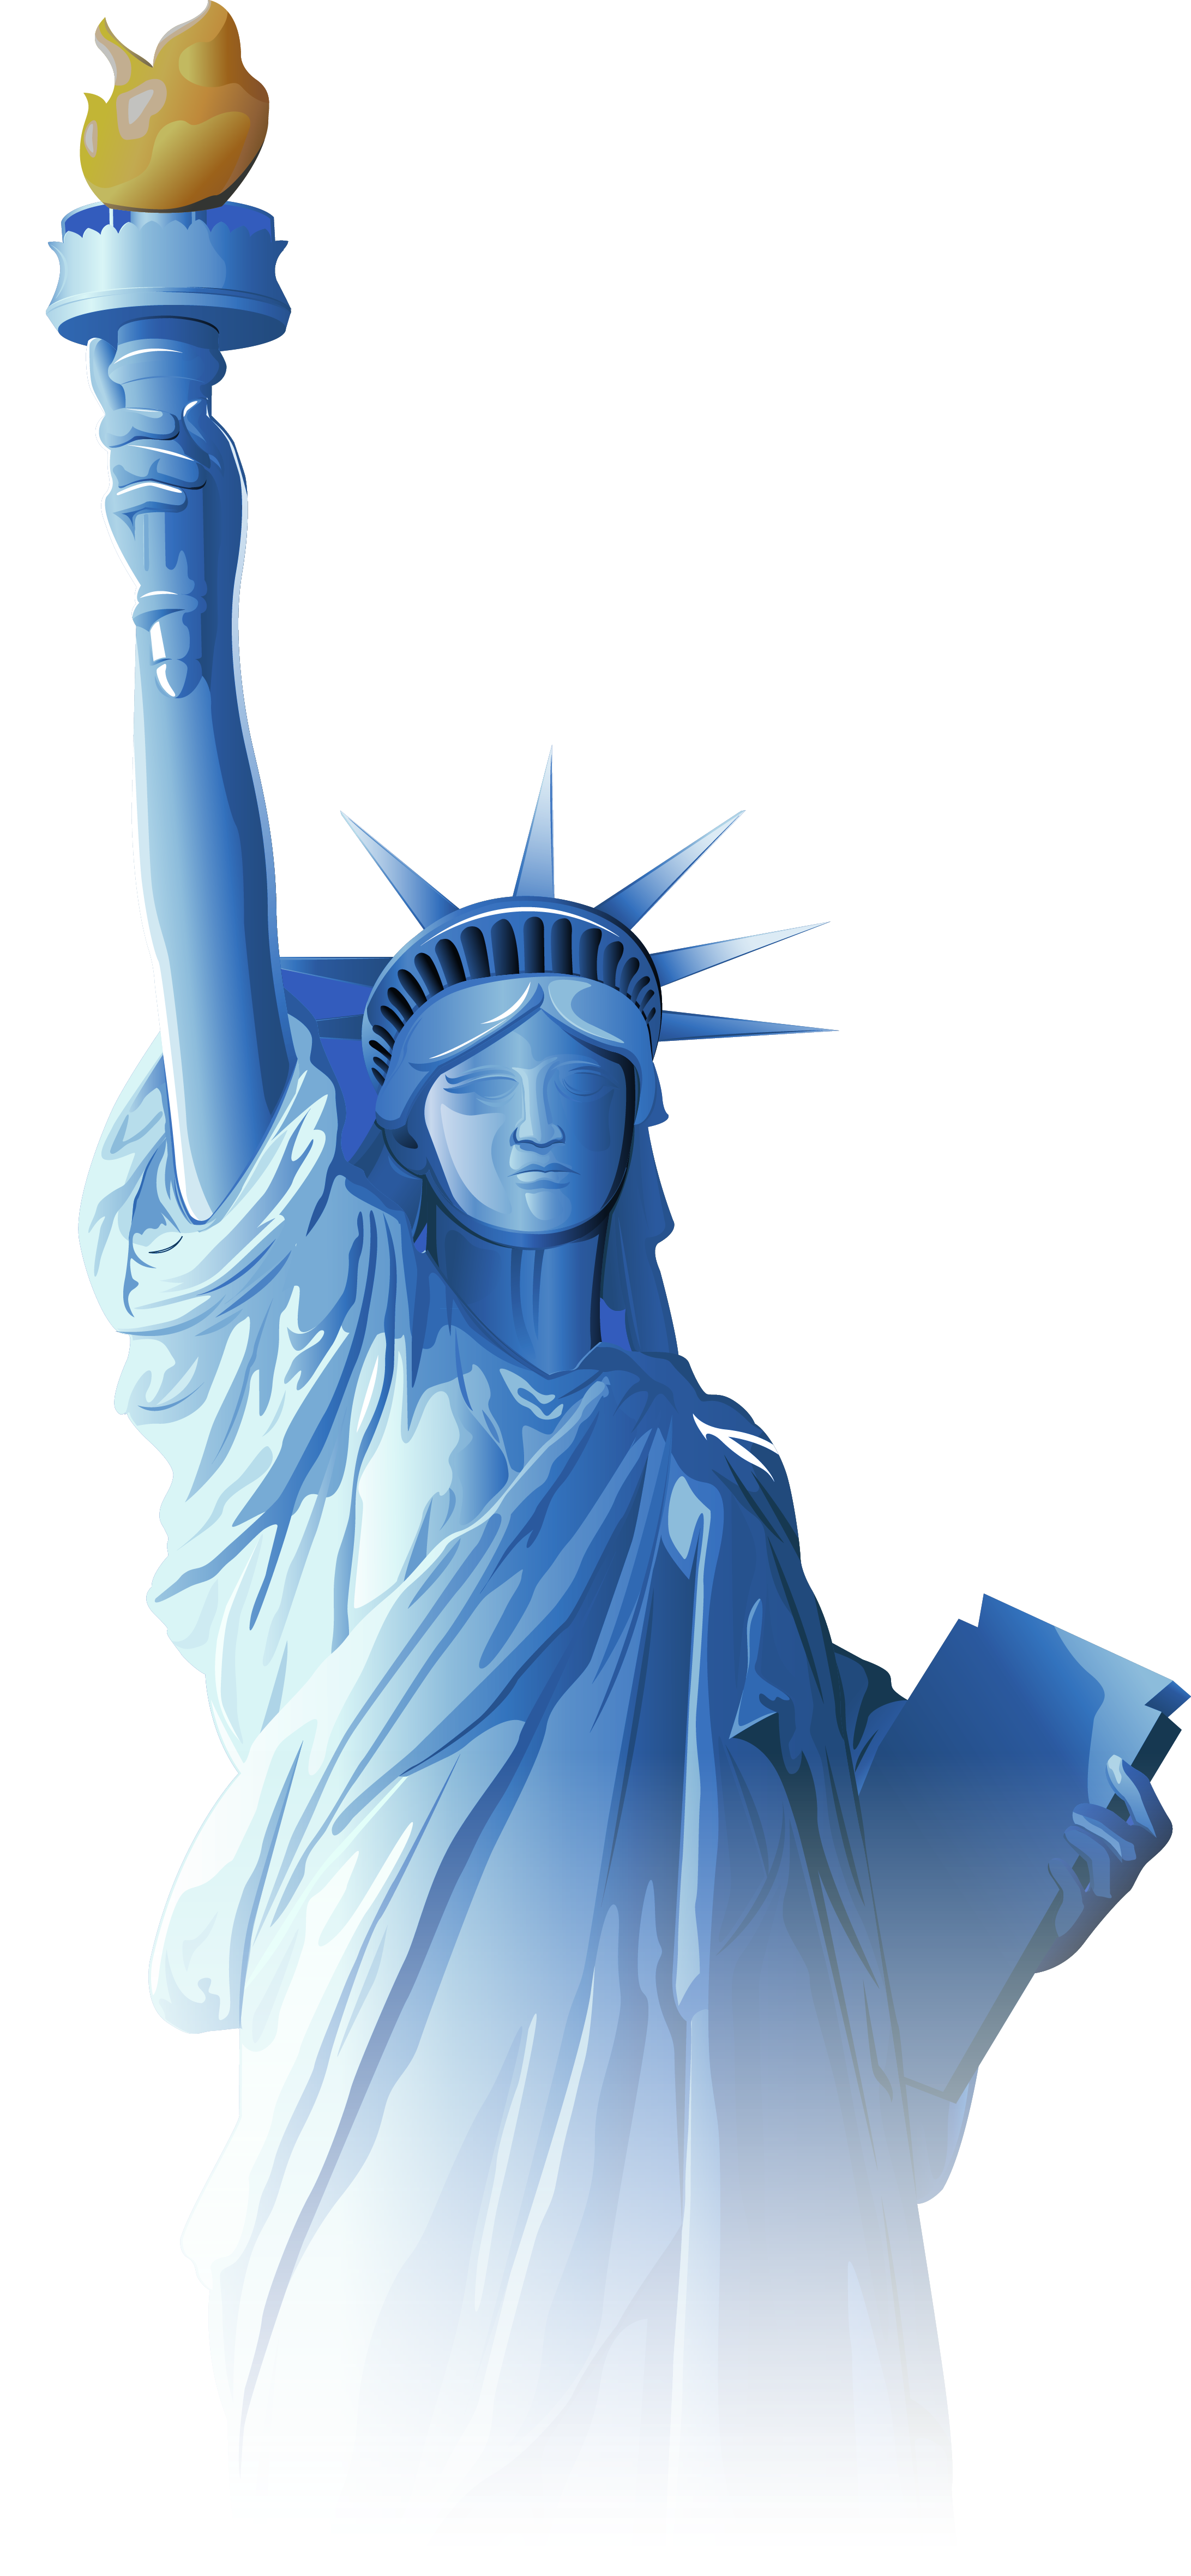 Statue of Liberty PNG Background Image